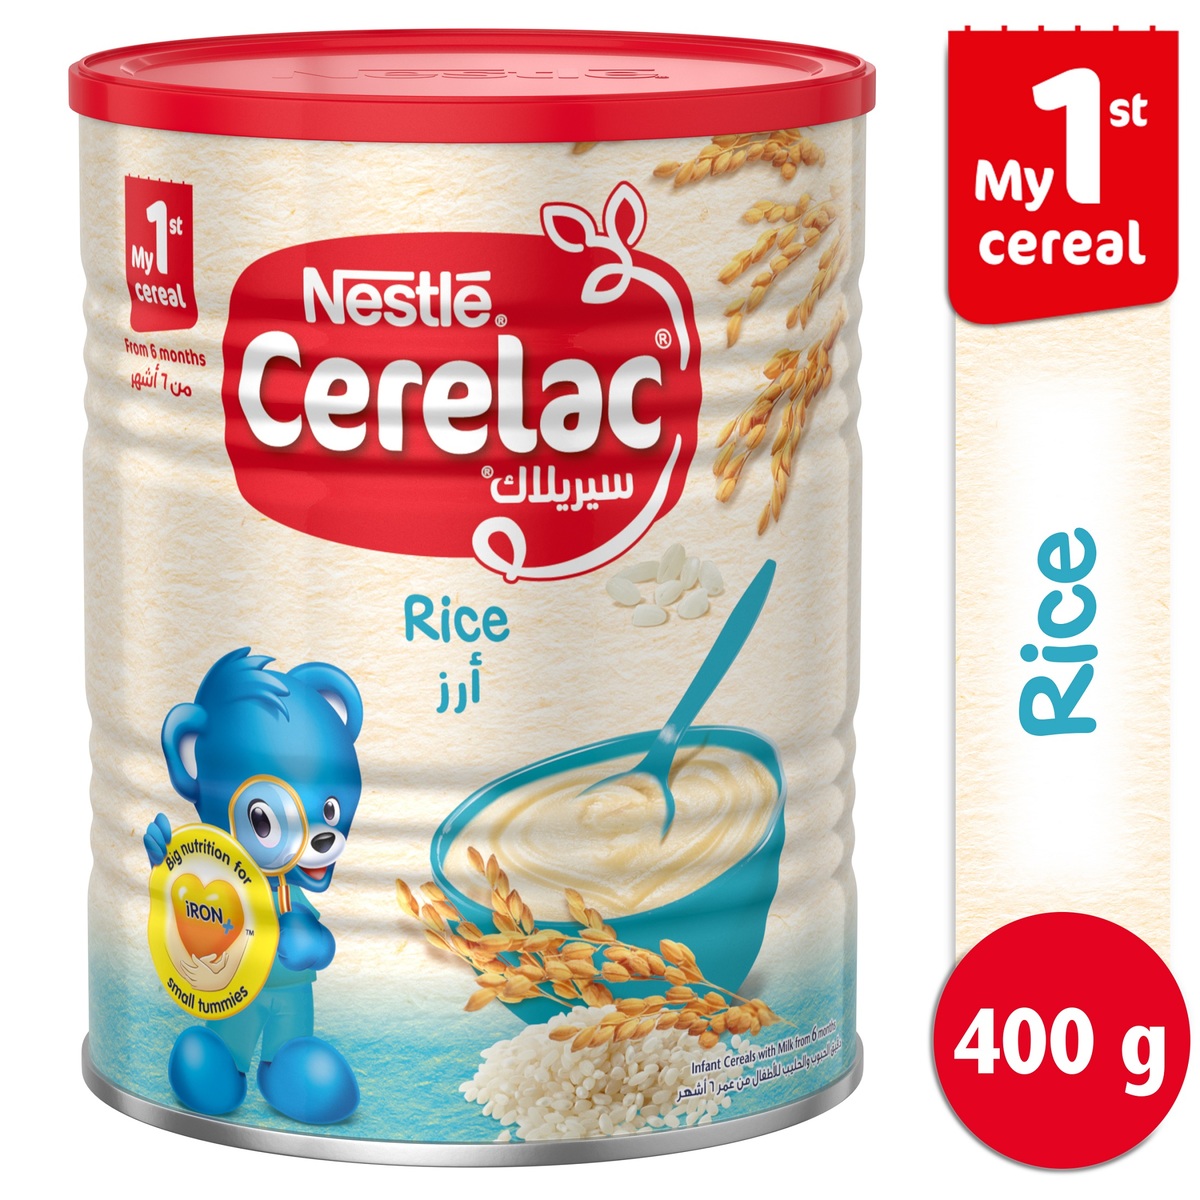 Nestle Cerelac Infant Cereal Baby Food Rice 400g